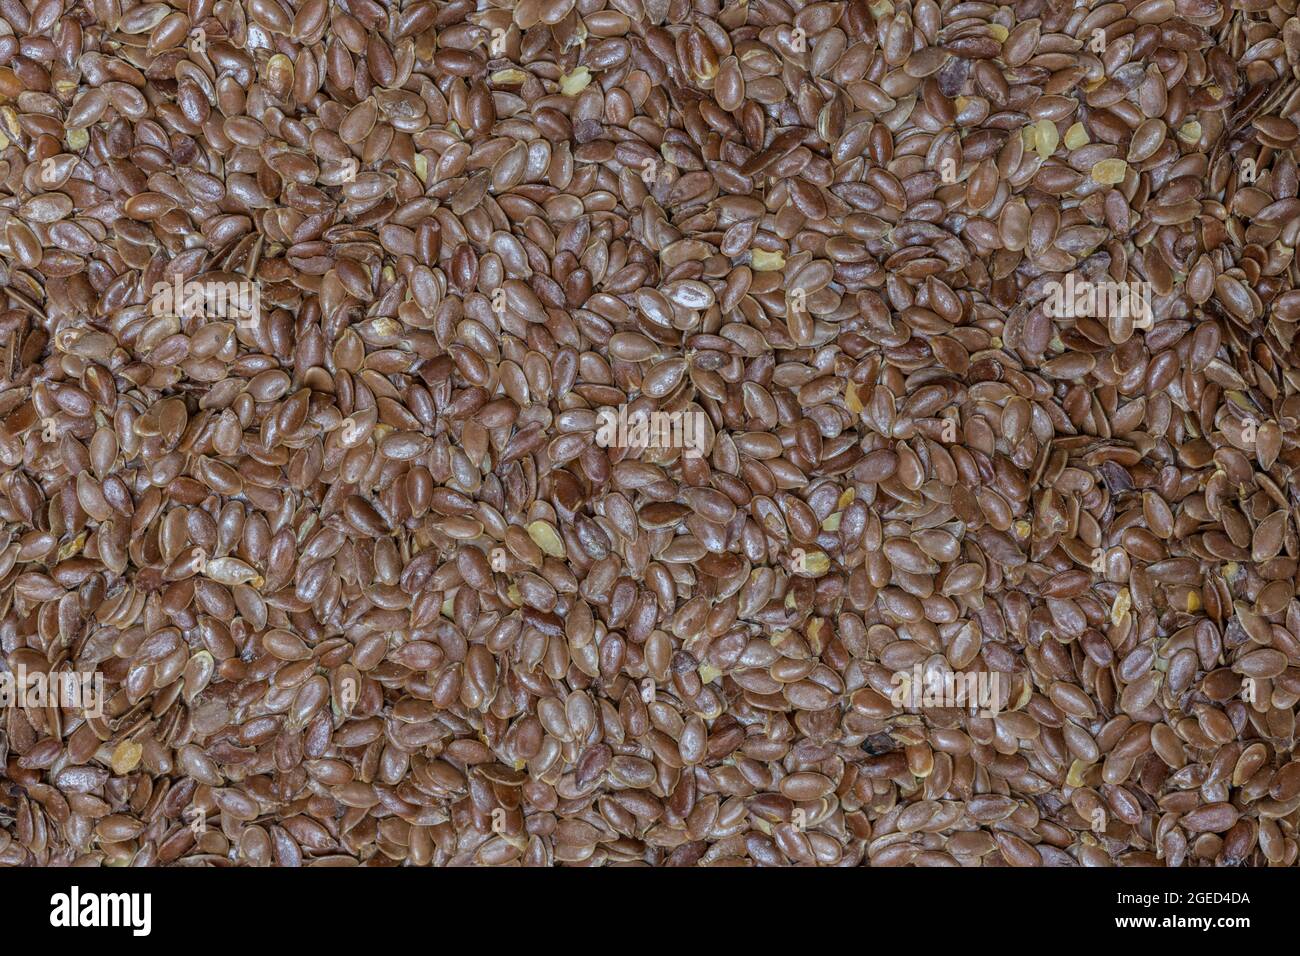 Flax seeds brown close up detail. Stock Photo